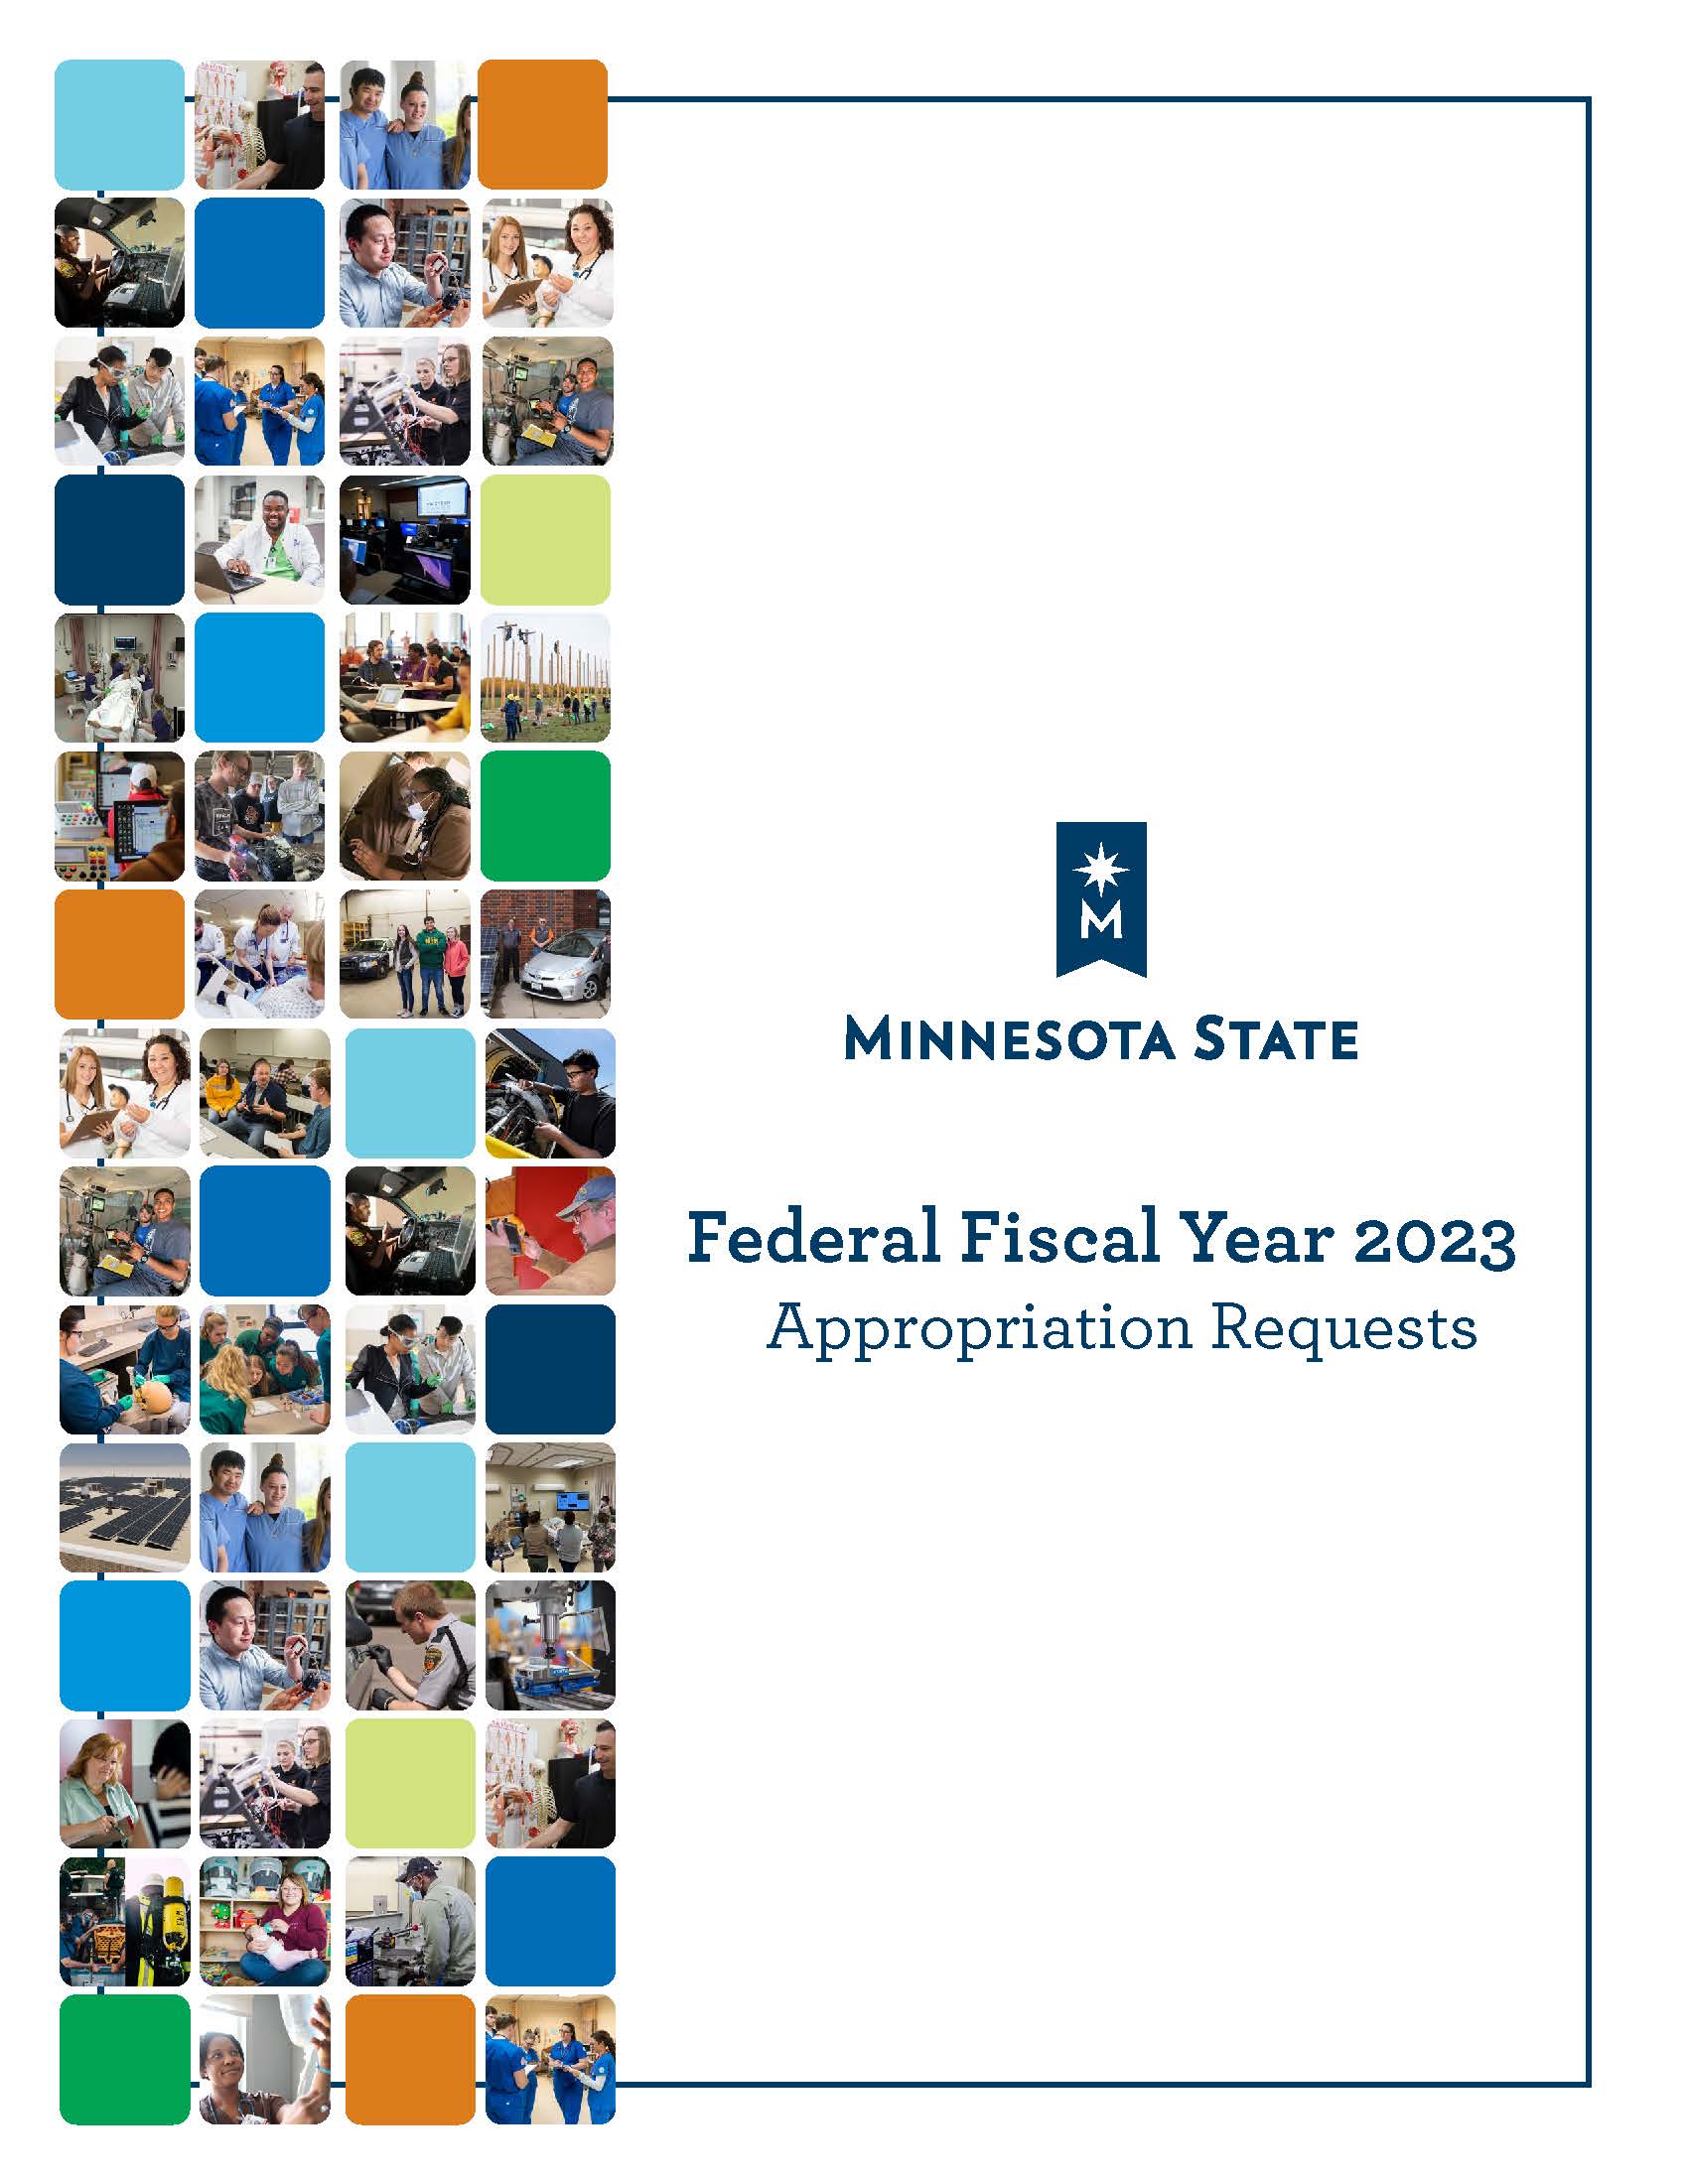 Minnesota-State-Federal-Fiscal-Year-2023-Appropriation-Requests.jpg